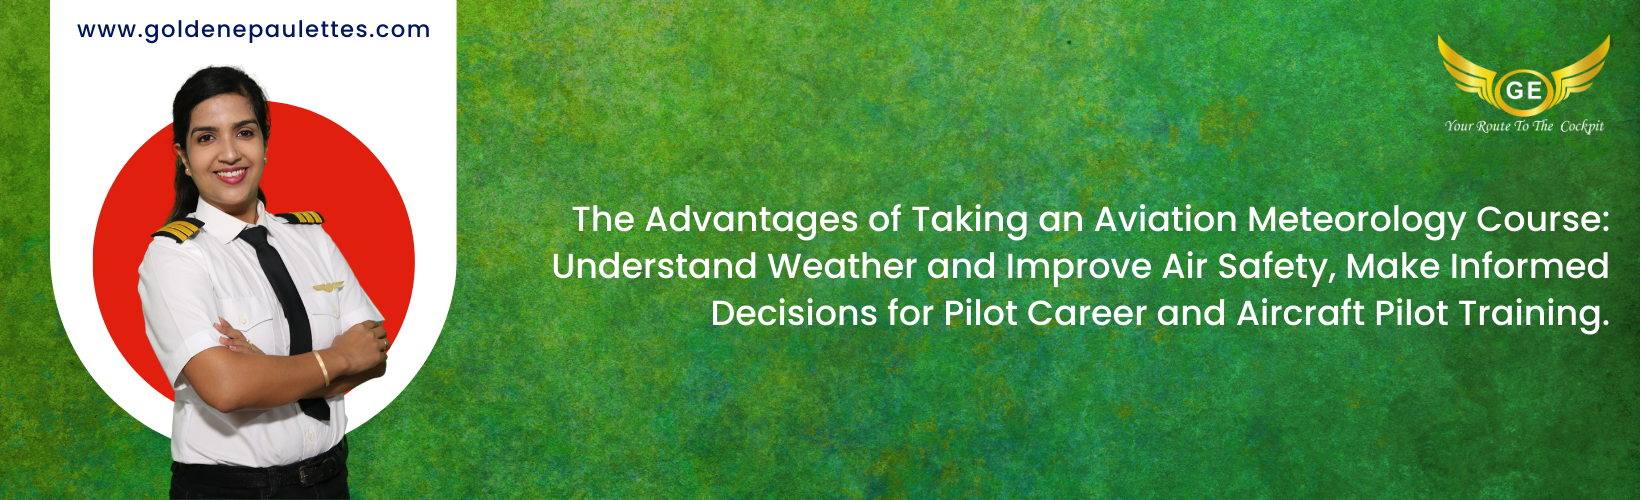 The Benefits of Taking an Aviation Meteorology Course